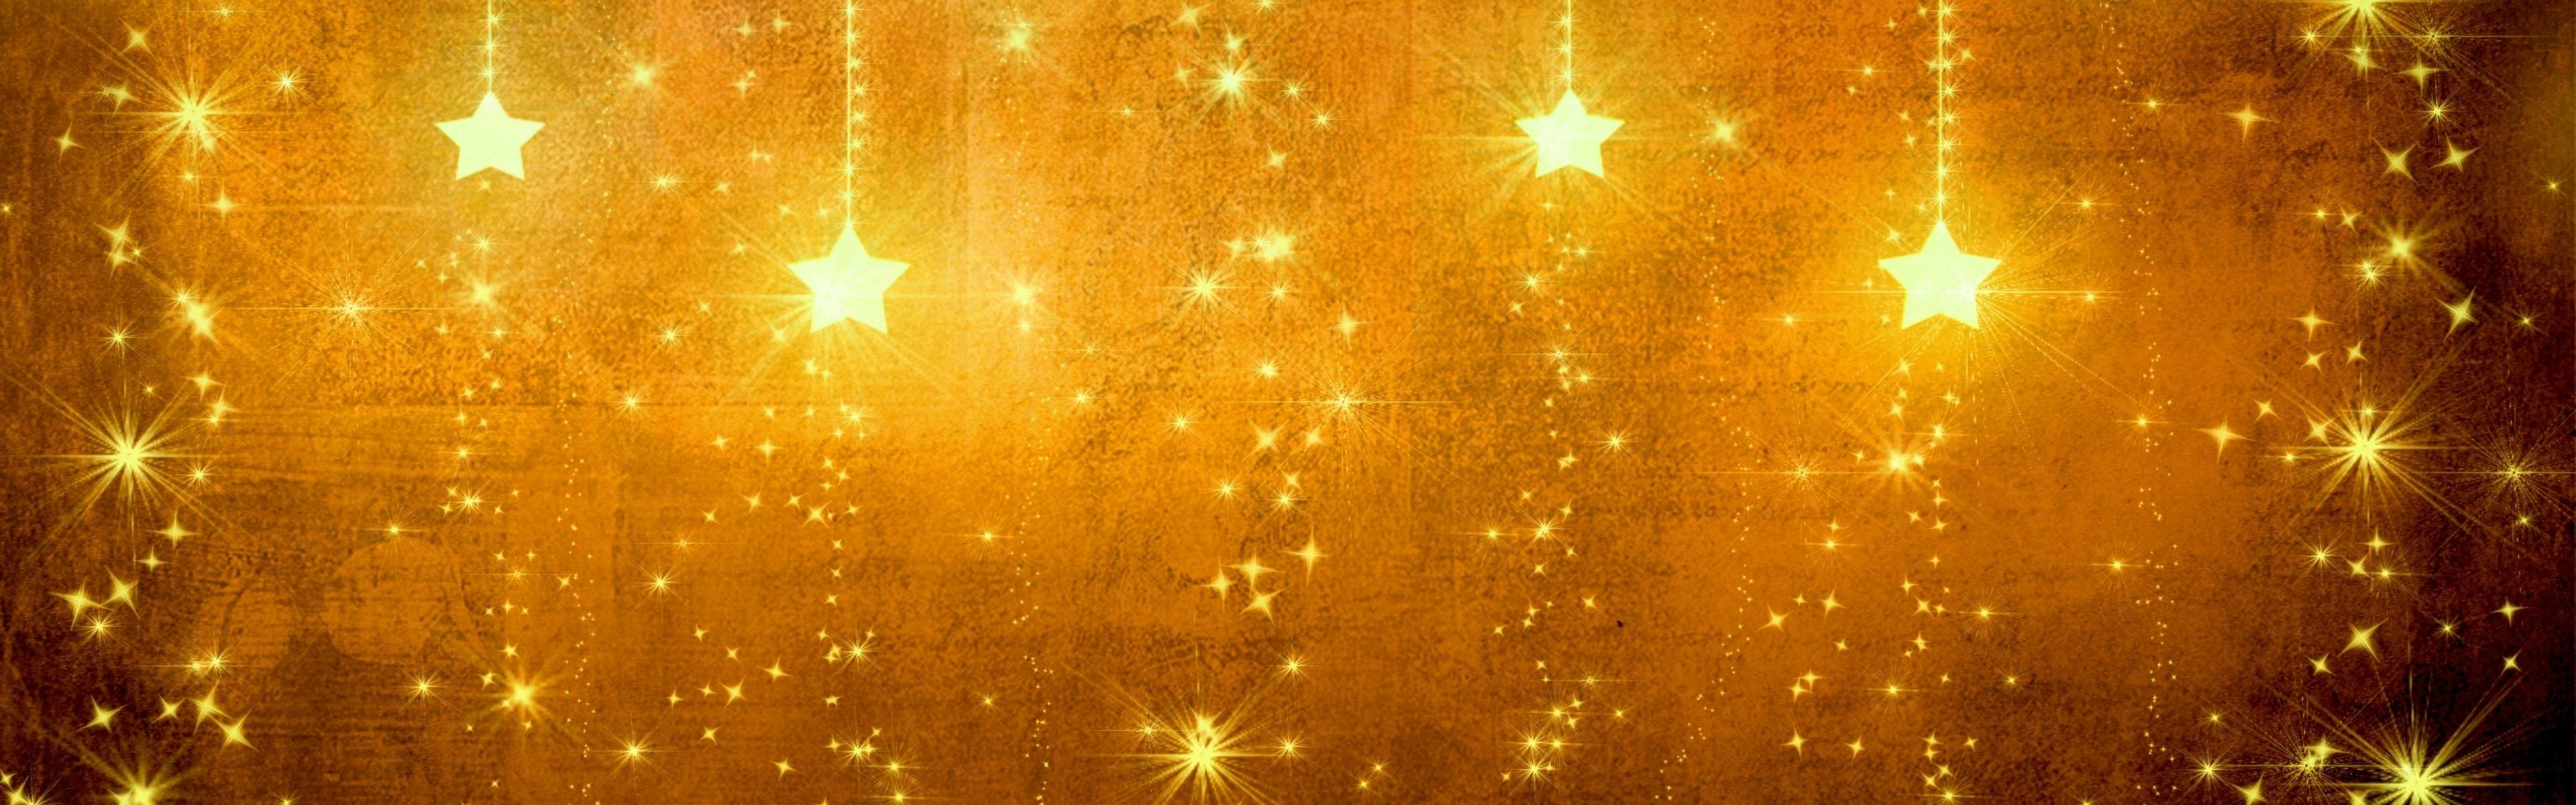 3840x1200 gold star background wallpapers